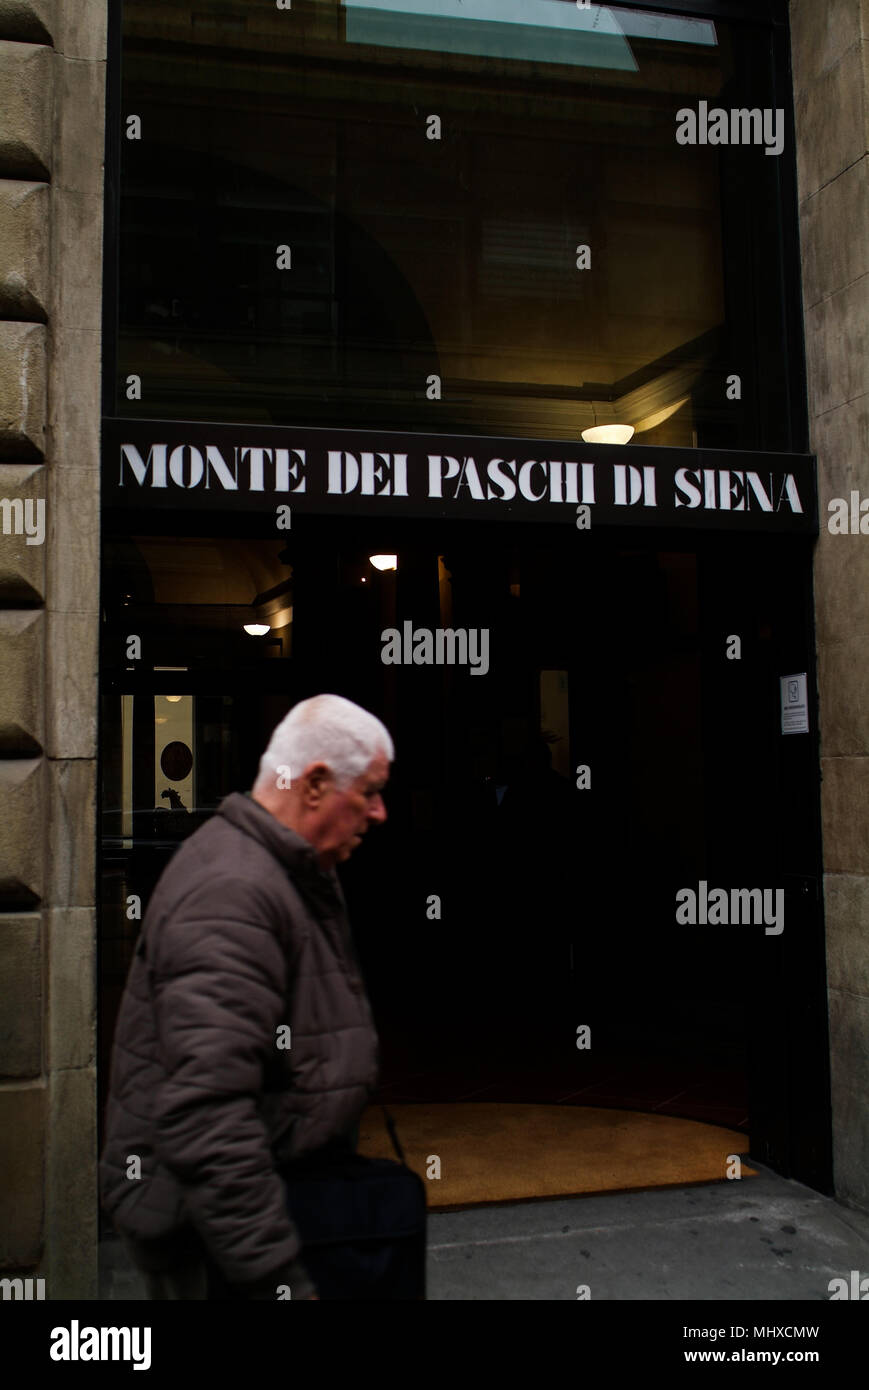 Old man walking in front of a bank of the circuit Monte dei Paschi di Siena, financially collapsed after 2008 bankrupt scandal Stock Photo